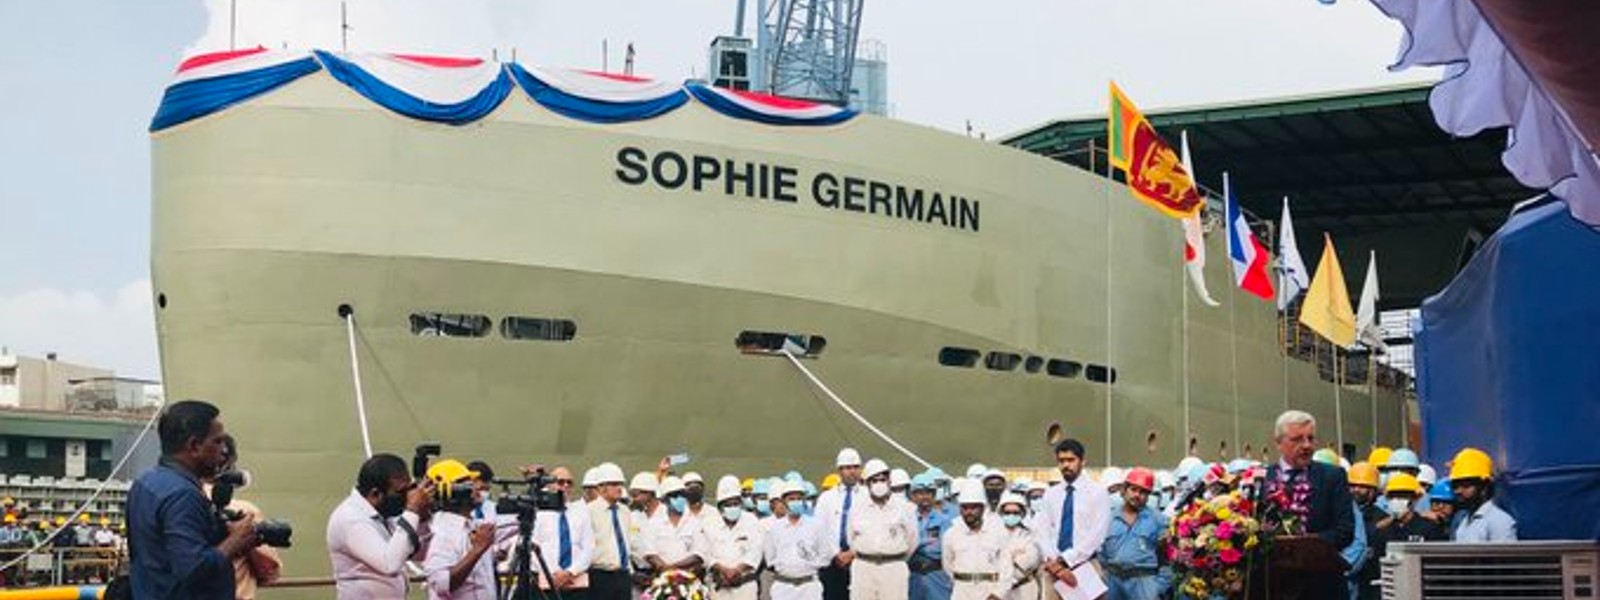 Dockyard launched new ship for France